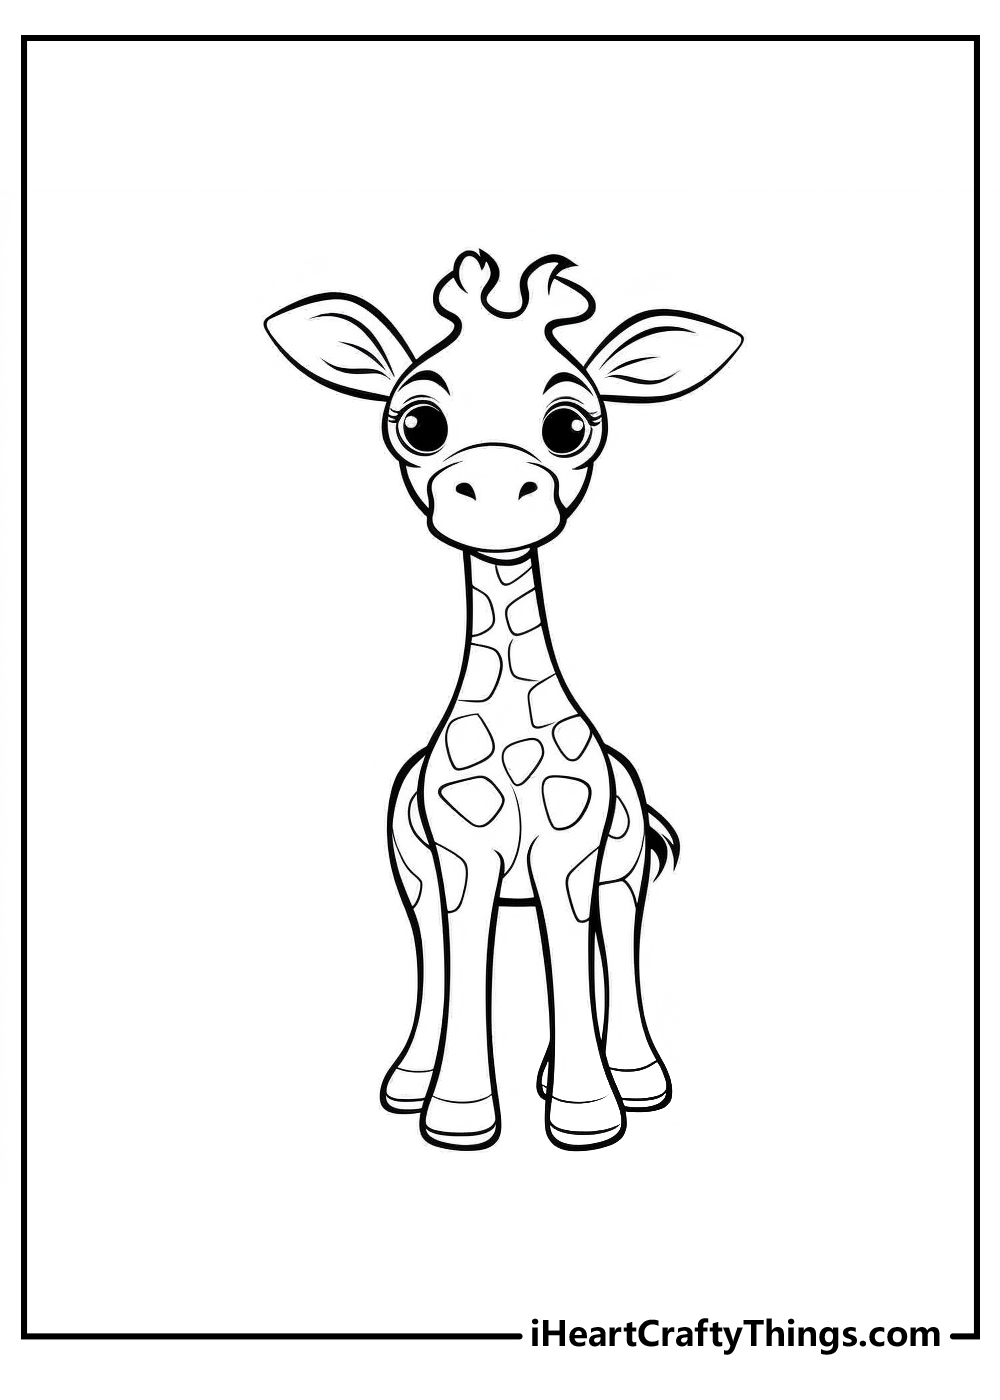 black-and-white giraffe coloring pages